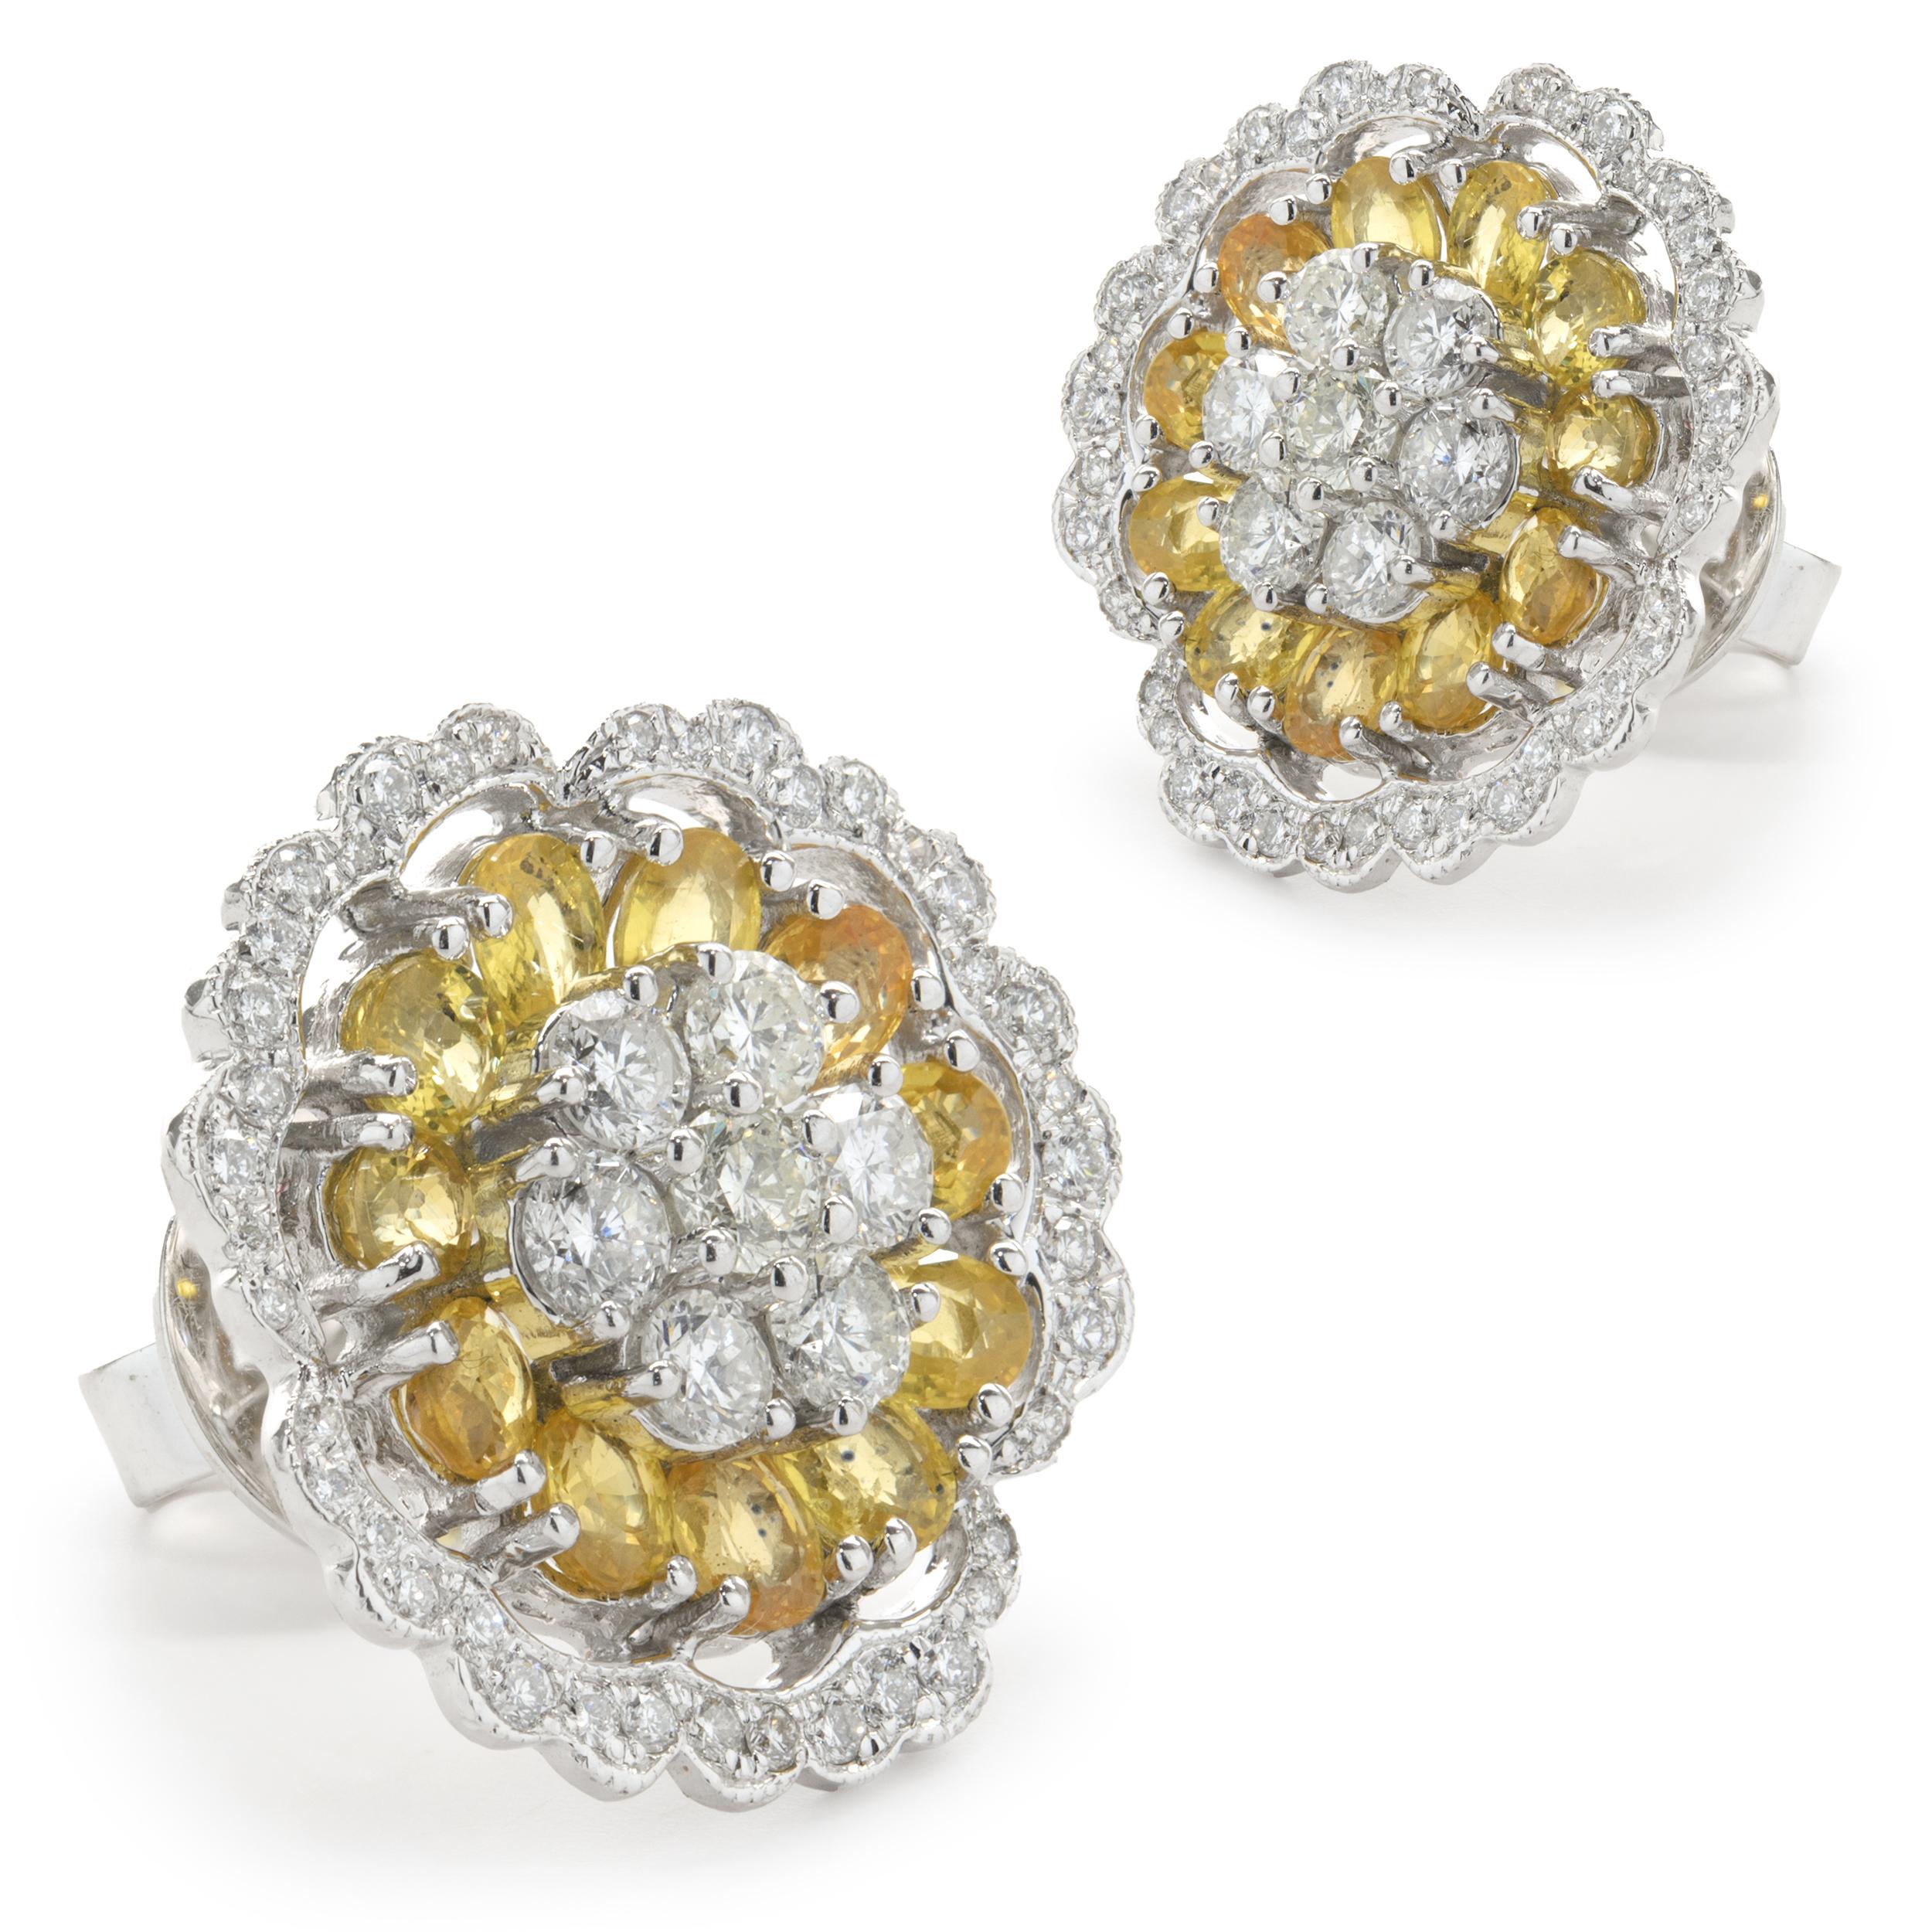 Designer: custom
Material: 18K White gold
Diamond: 47 round brilliant diamonds= 1.18cttw
Color: G
Clarity: SI2
Sapphire: 22 oval cut yellow sapphires= 5.06cttw
Dimensions: earrings measure 21mm in length
Fastenings: post with friction backs	
Weight: